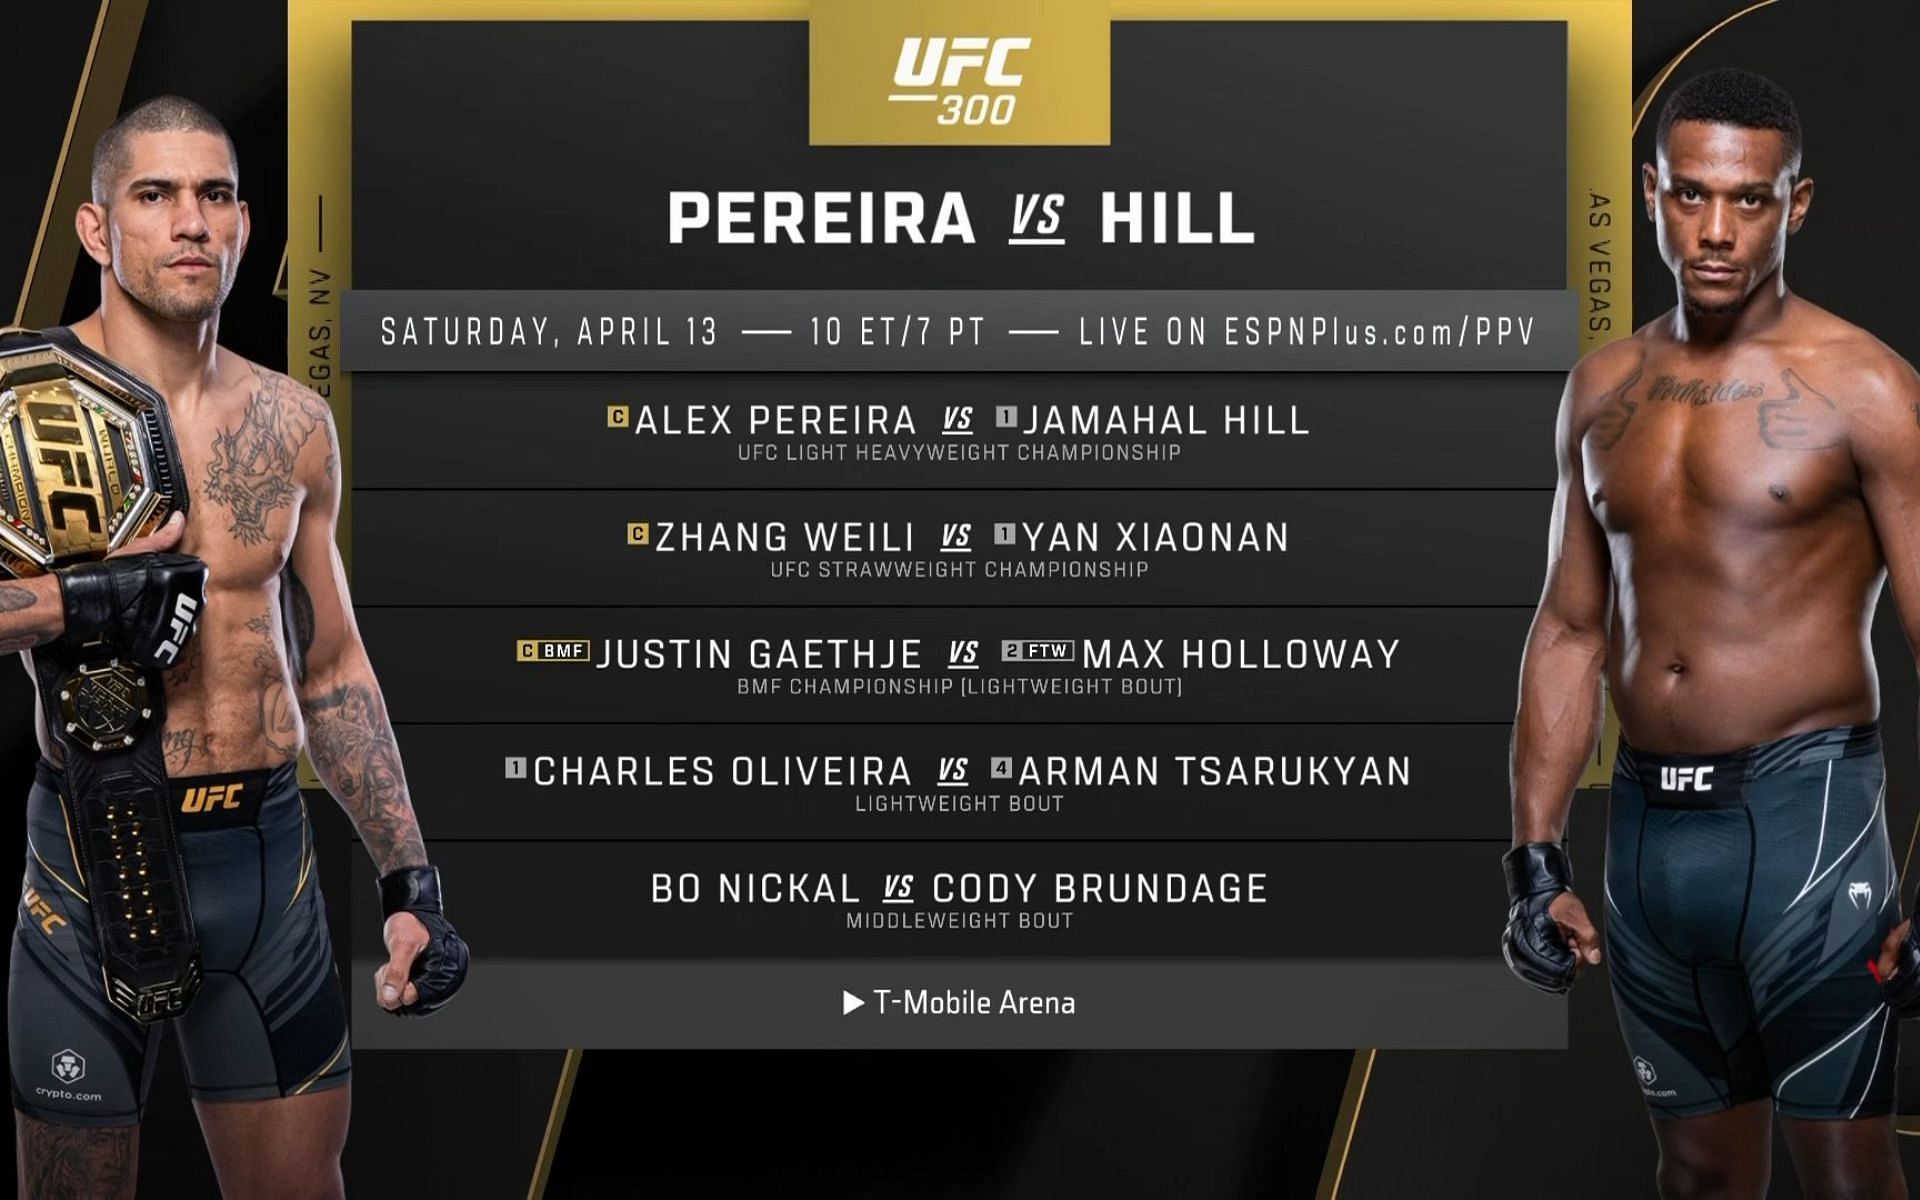 Judge and referee assignments locked-in for UFC 300 headliner and co-main event bout, per reports [Image courtesy: @ufc - X]